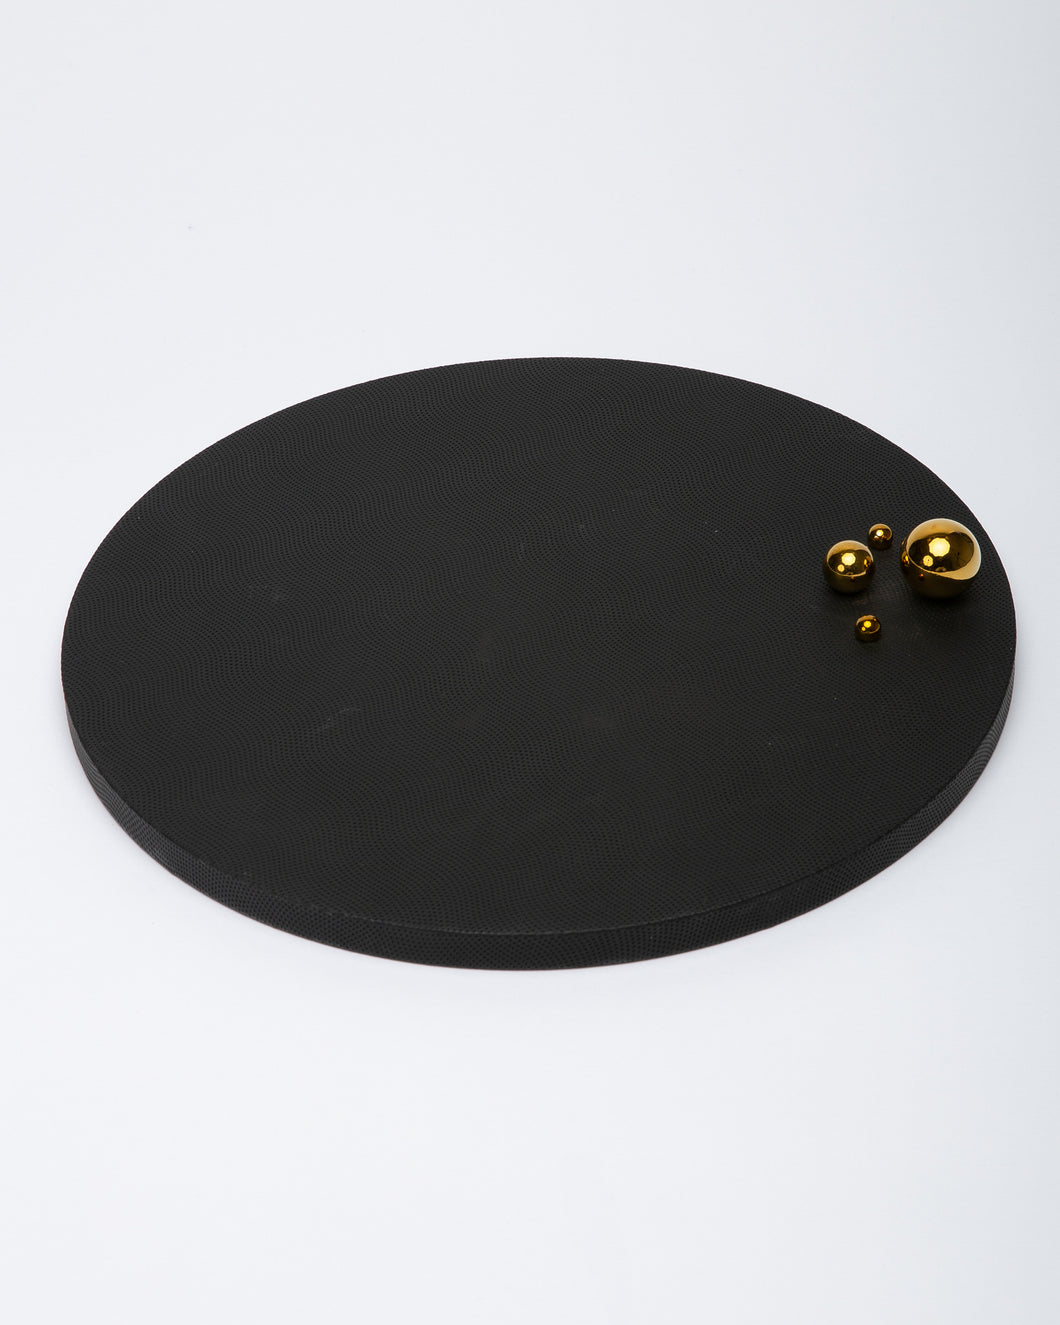 Giobagnara Black Leather Tray with Golden Bubbles